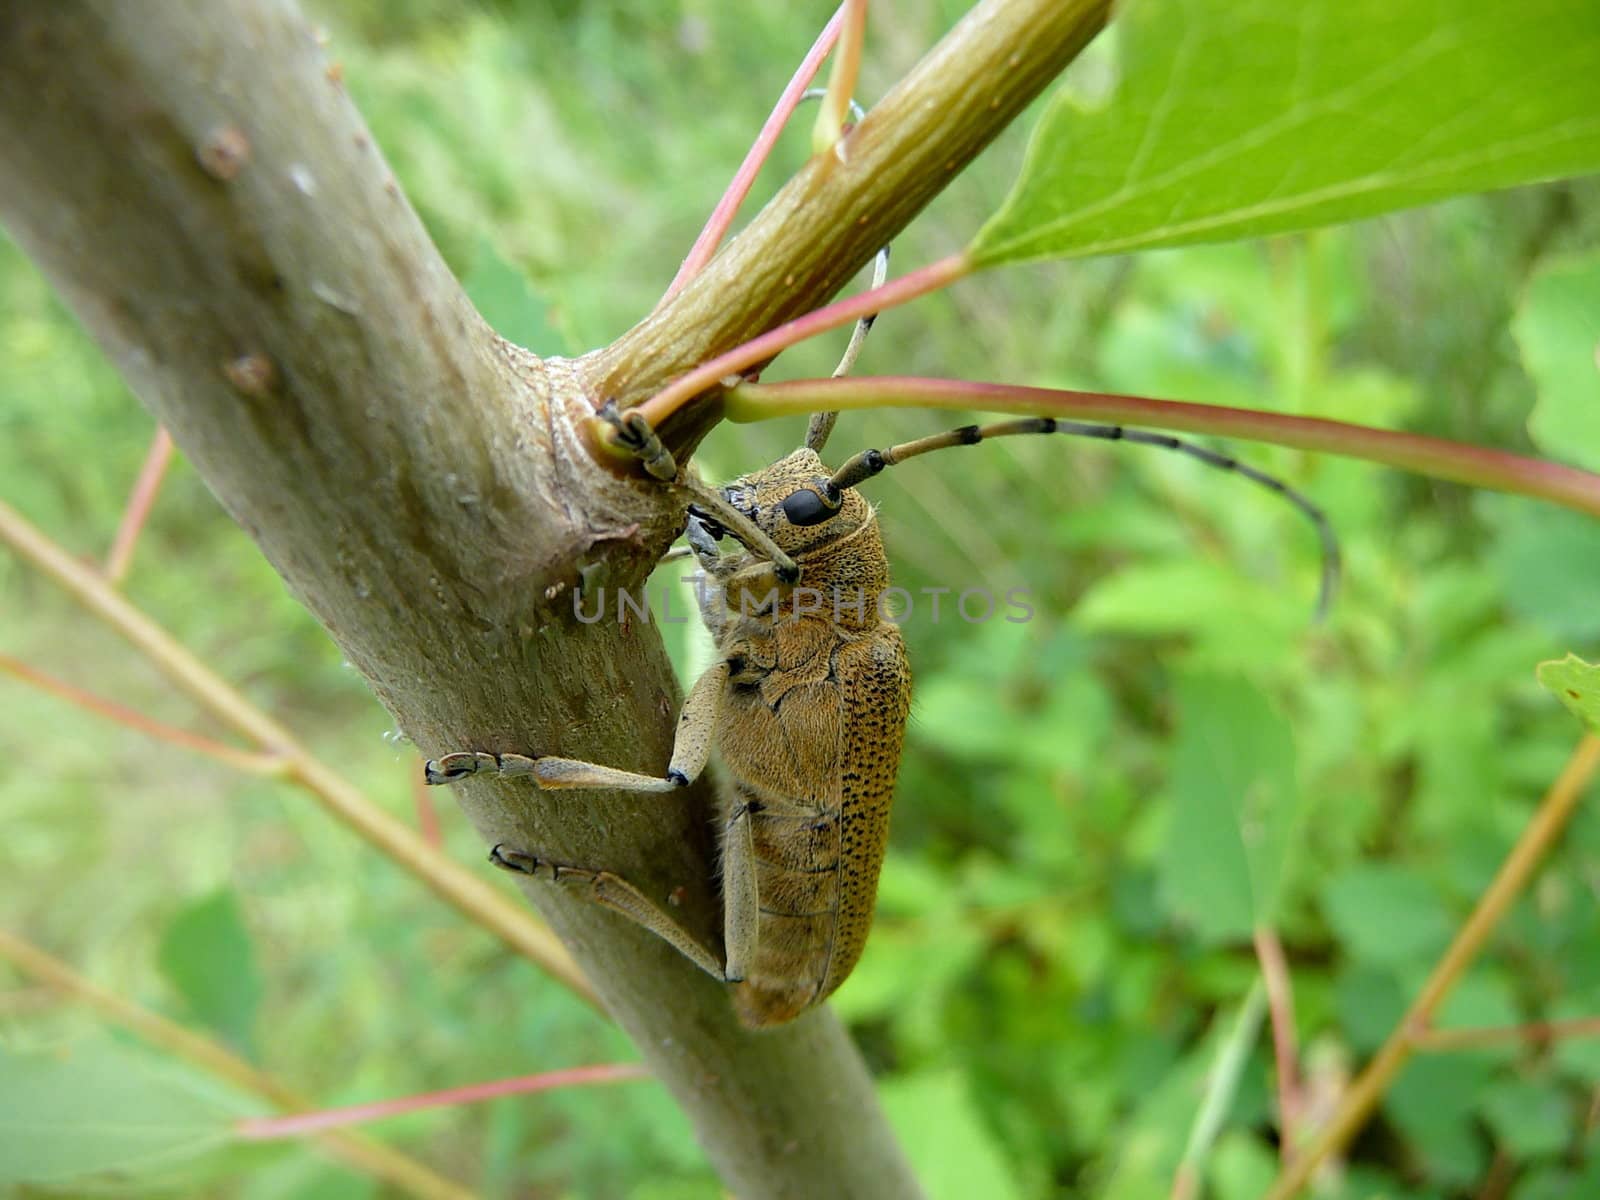 Large bug with long antennas on the tree